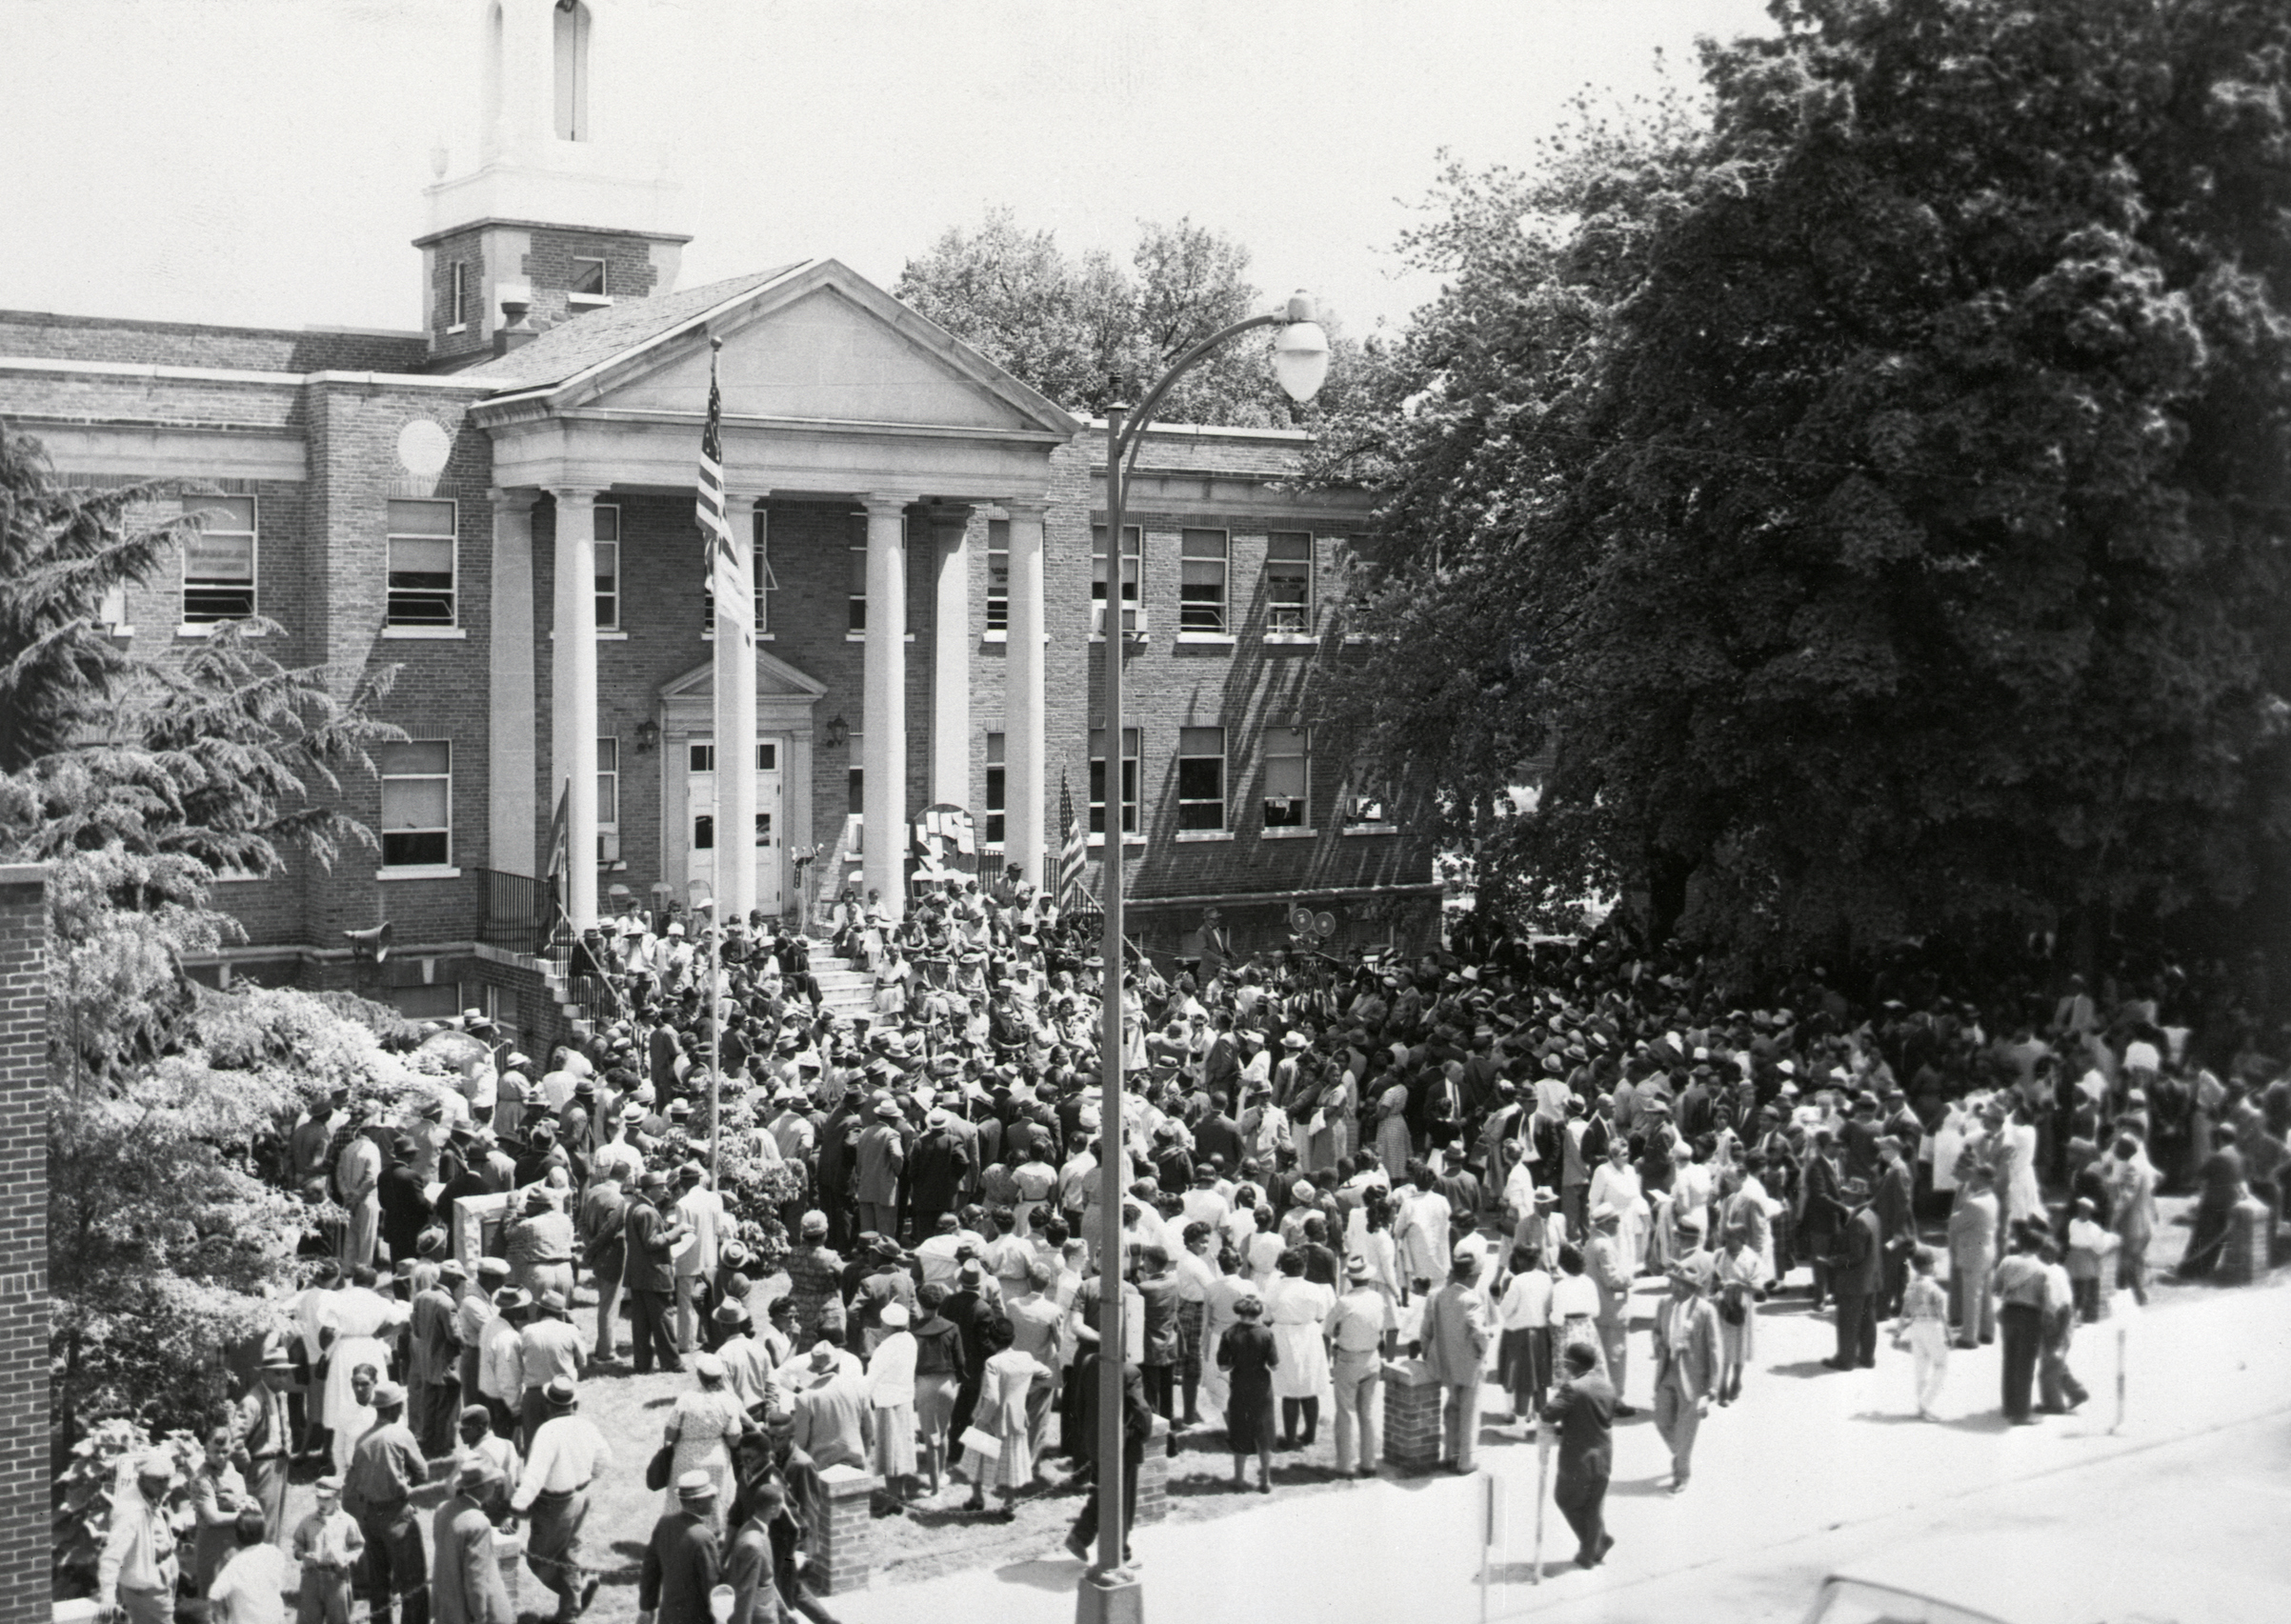 A crowd of about 1,000 attends an NAACP rally in Farmville, Va., marking the 7th anniversary of the Supreme Court's school desegregation ruling. The rally was at the courthouse of Prince Edward County, whose public schools were closed because of integration order. (Bettmann&mdash;Bettmann Archive)